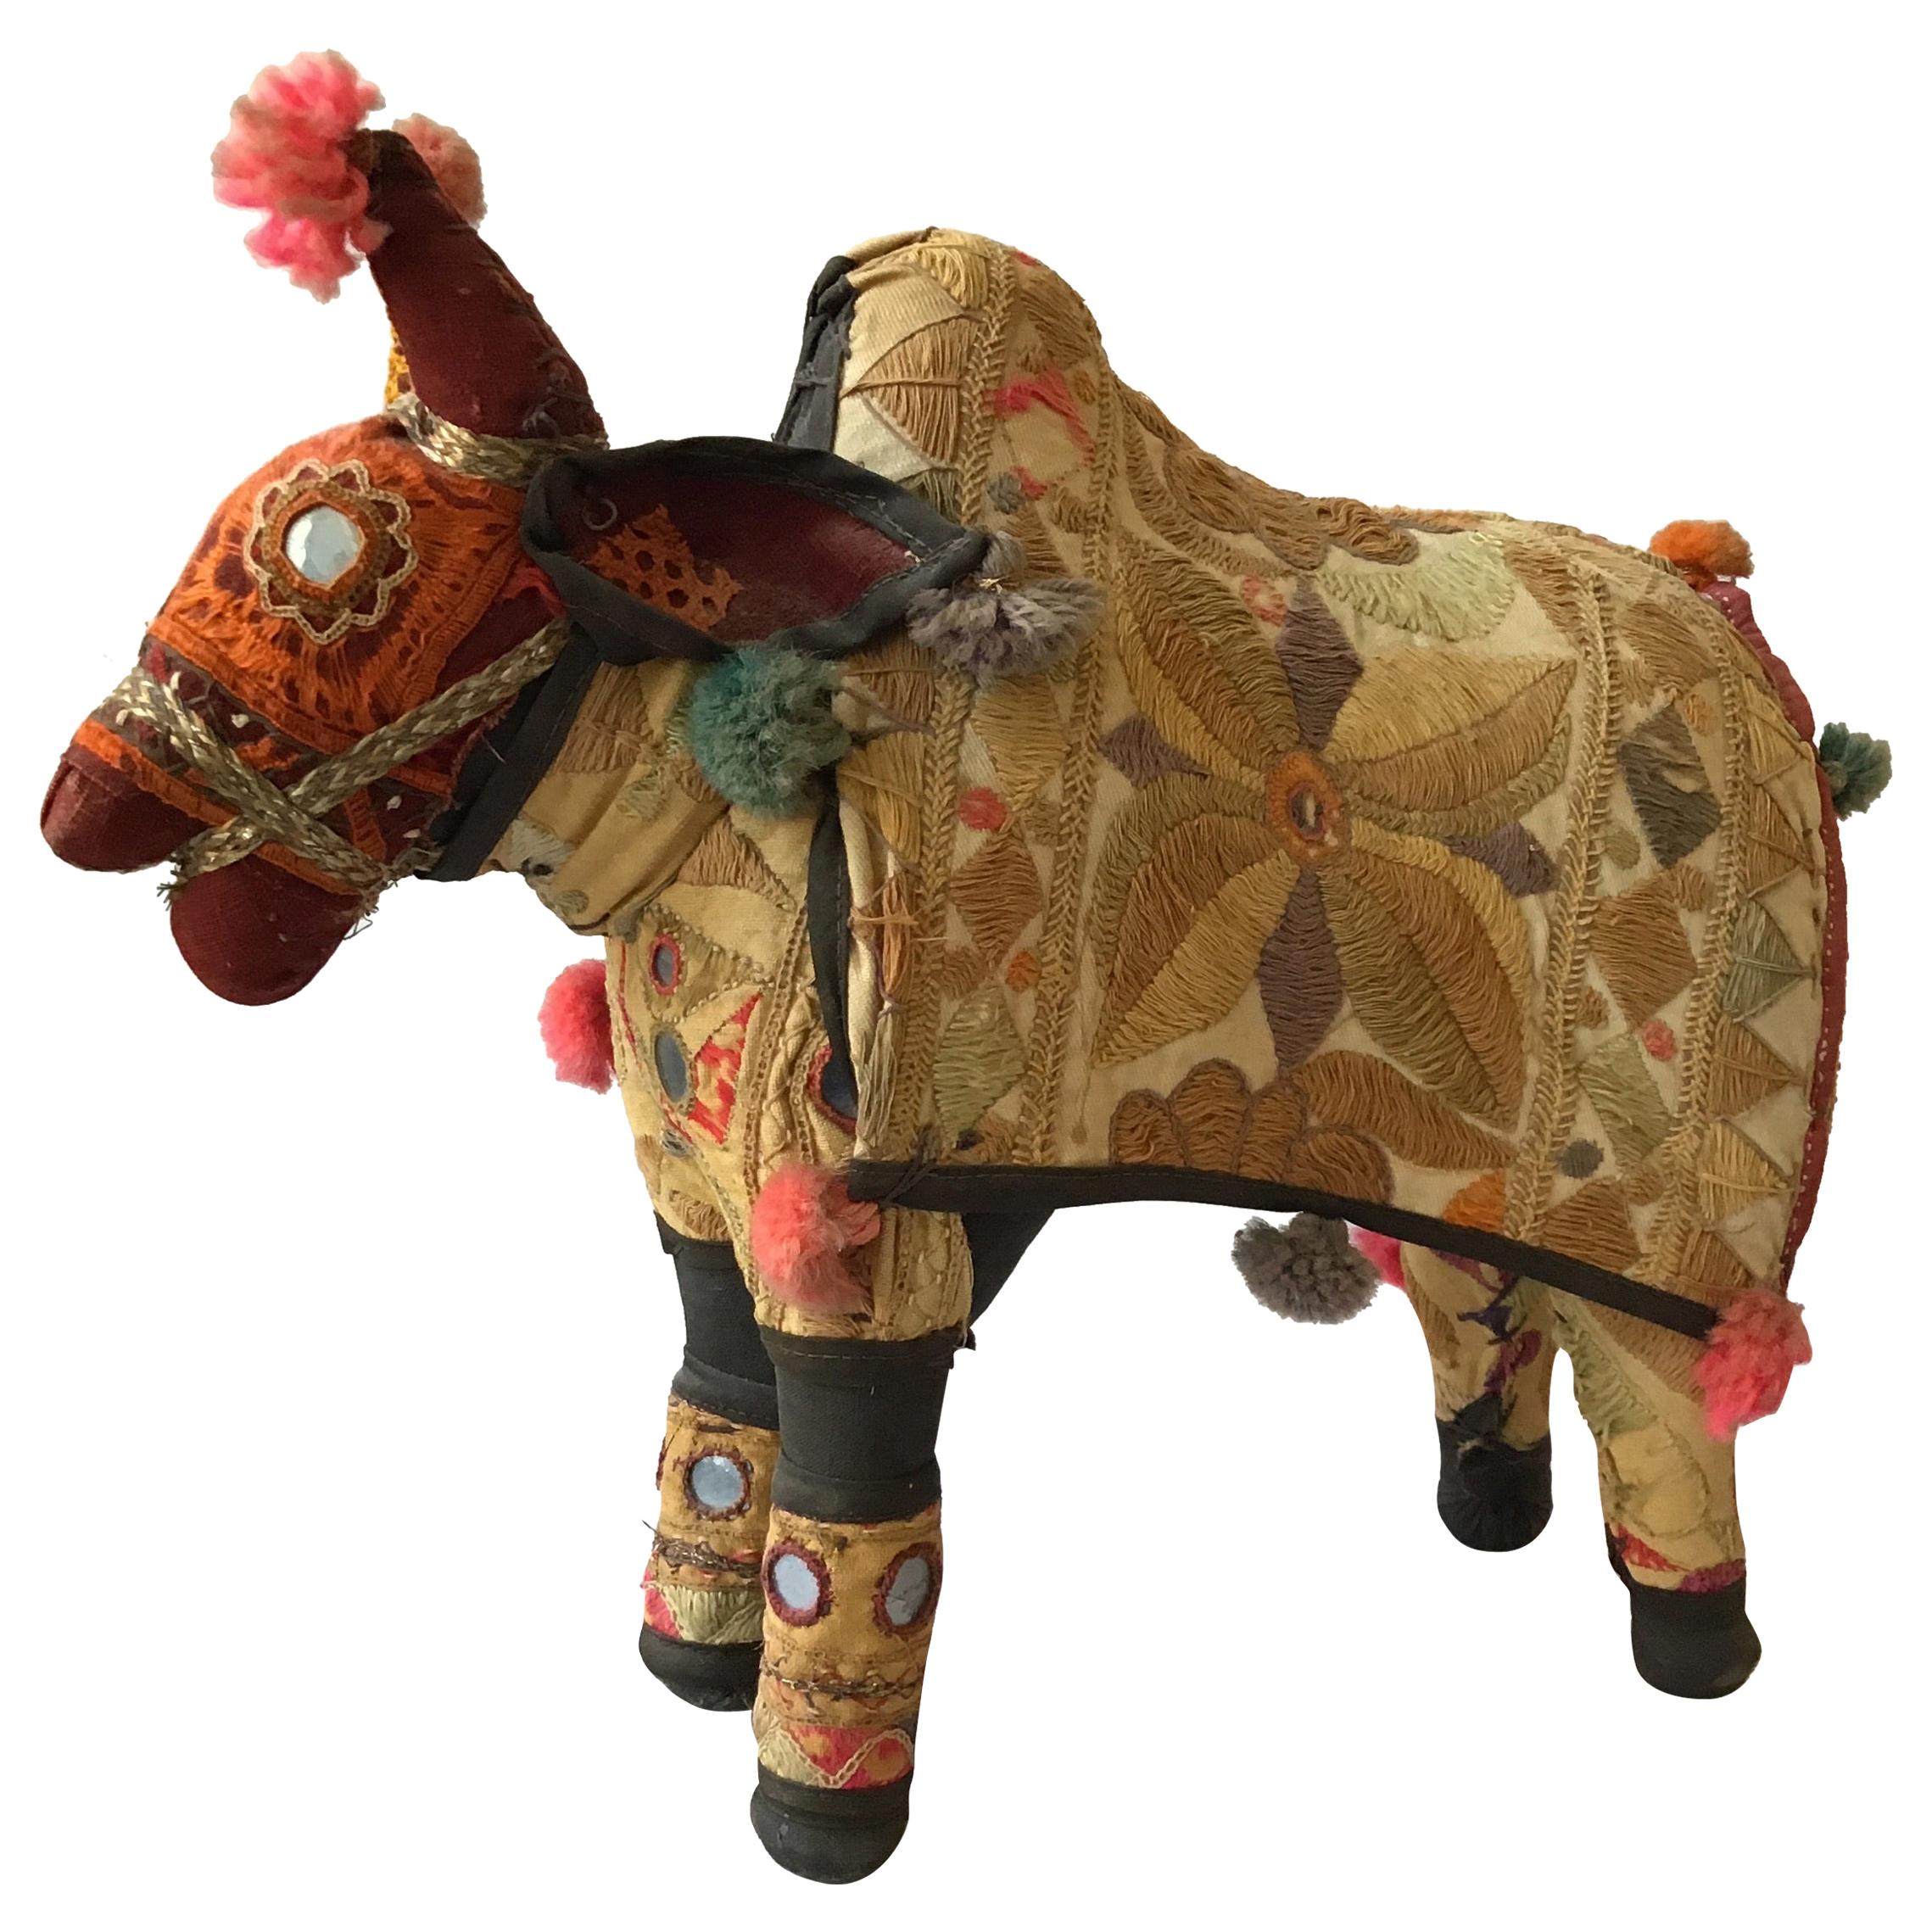 1960s Handmade Stuffed Ox Toy from India